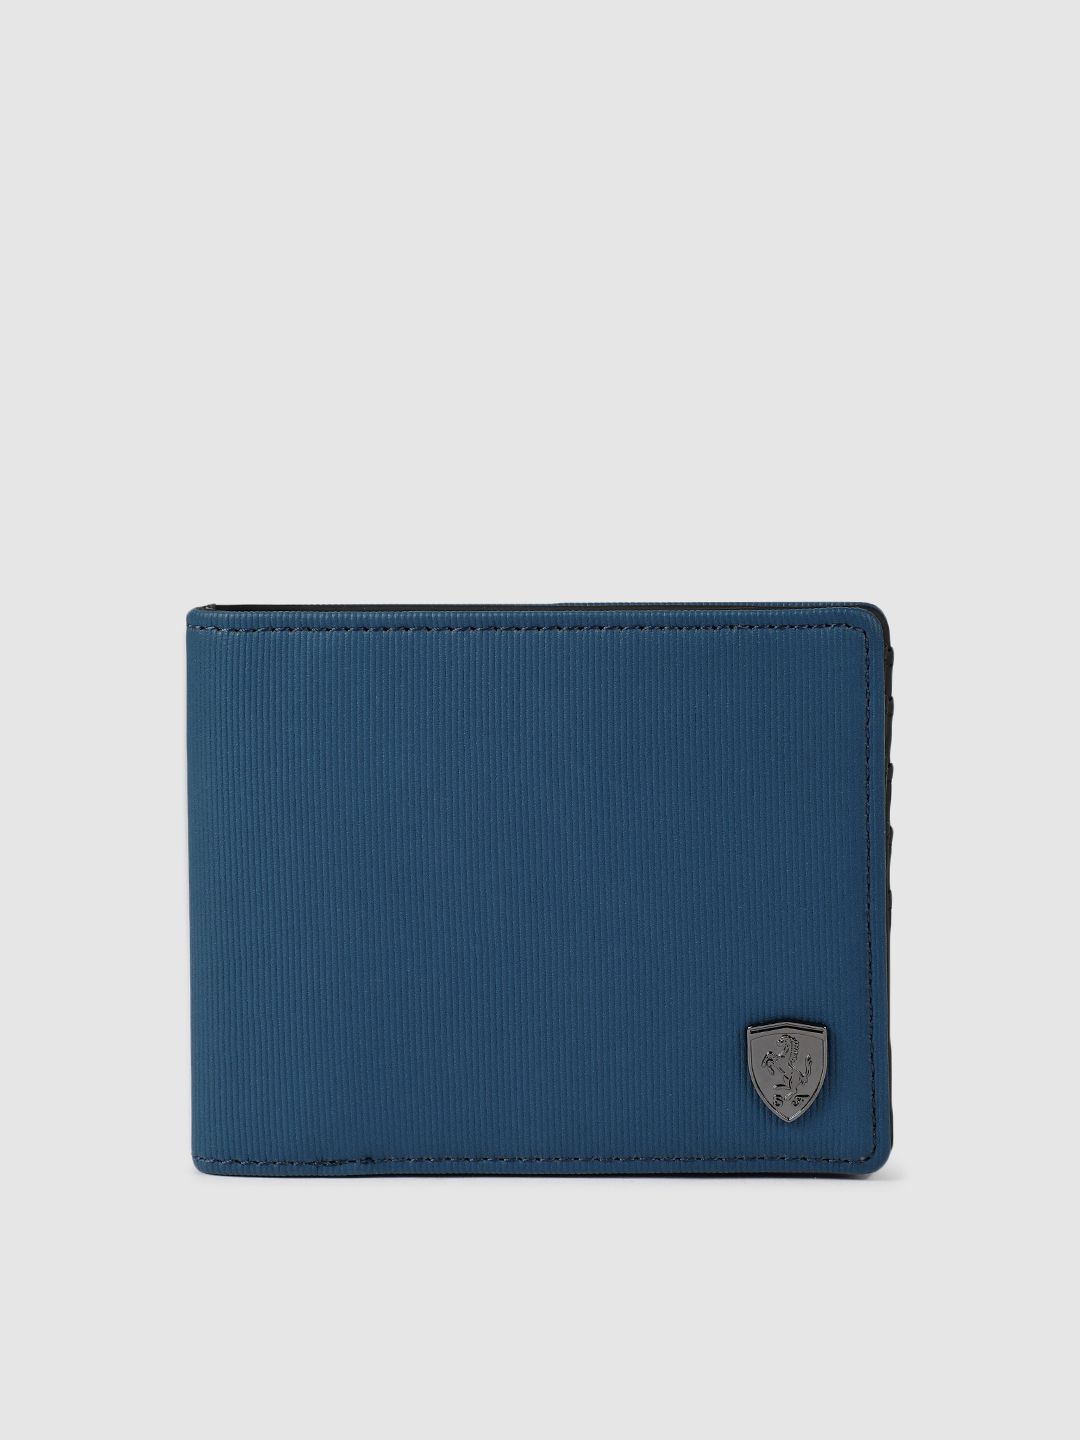 Puma Unisex Blue Solid Two Fold Wallet Price in India